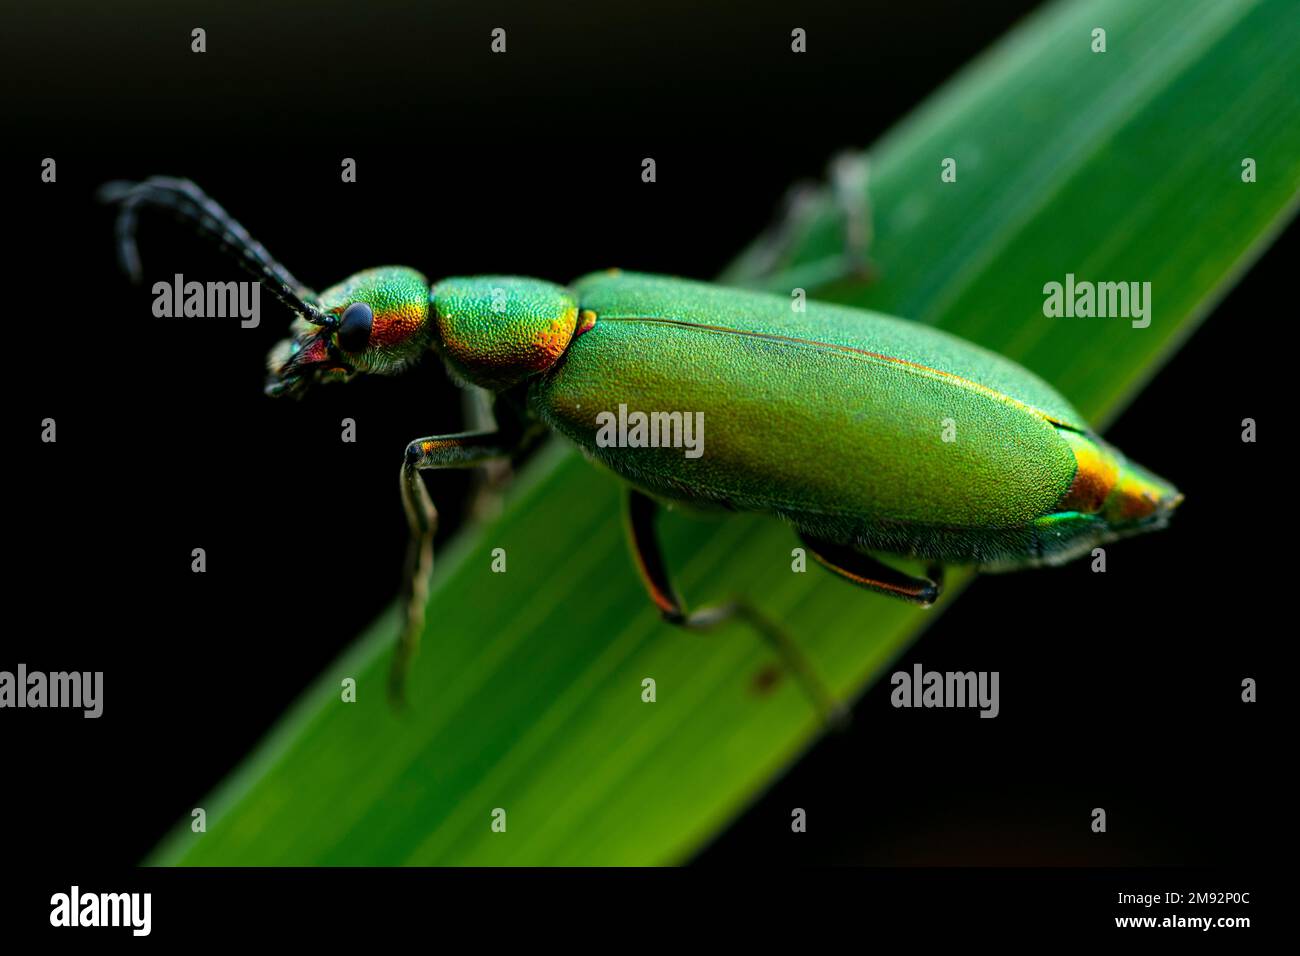 From above closeup of bright emerald green Spanish fly beetle sitting on plant tree against black background Stock Photo